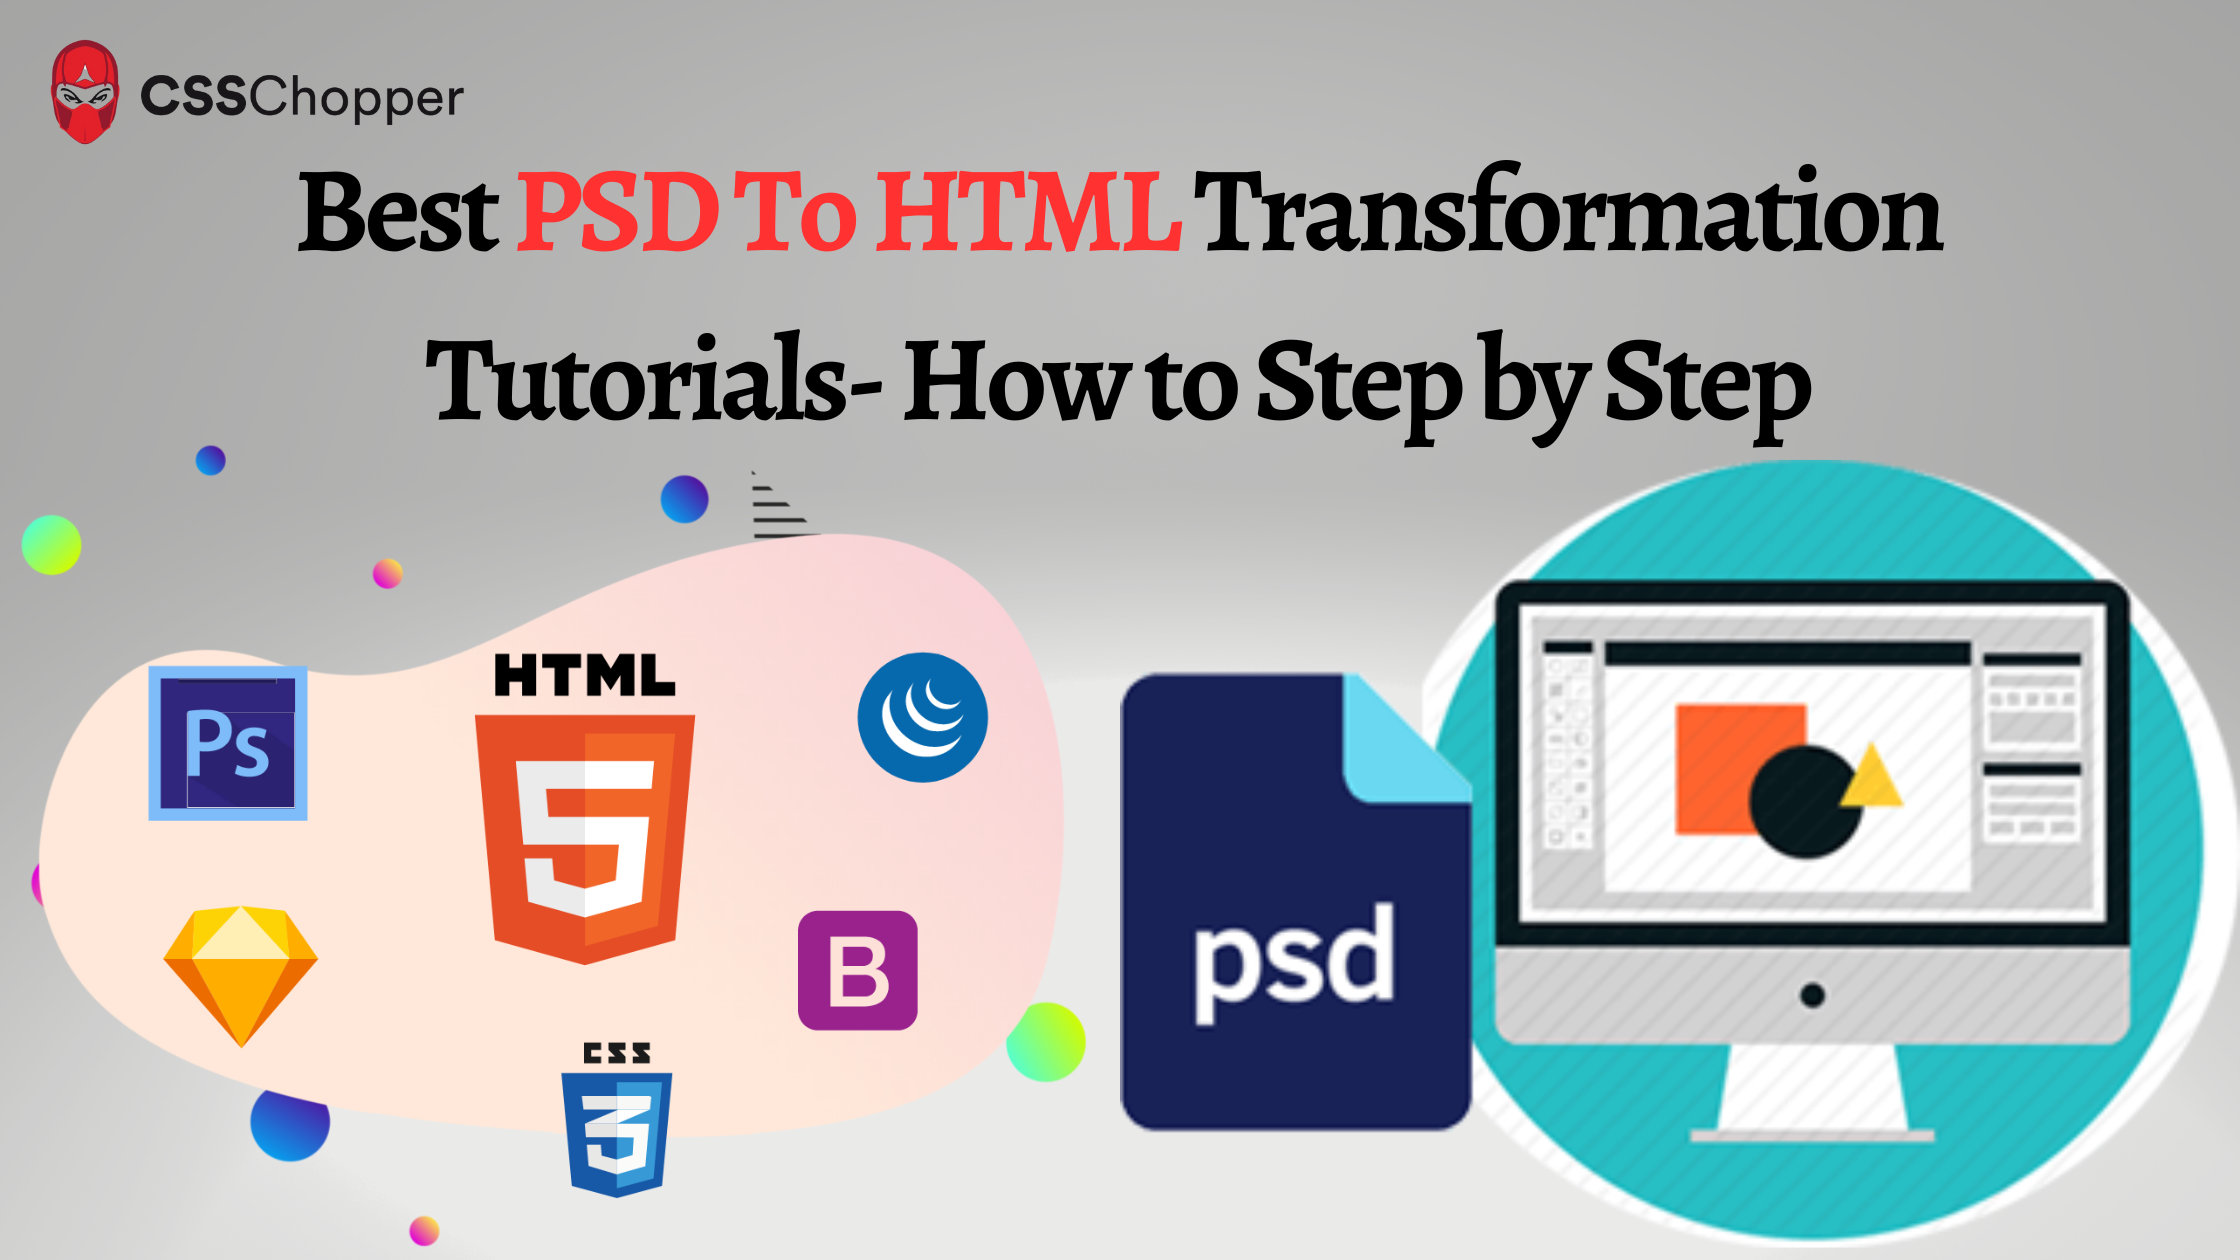 Best PSD To HTML Transformation Tutorials- How to Step by Step